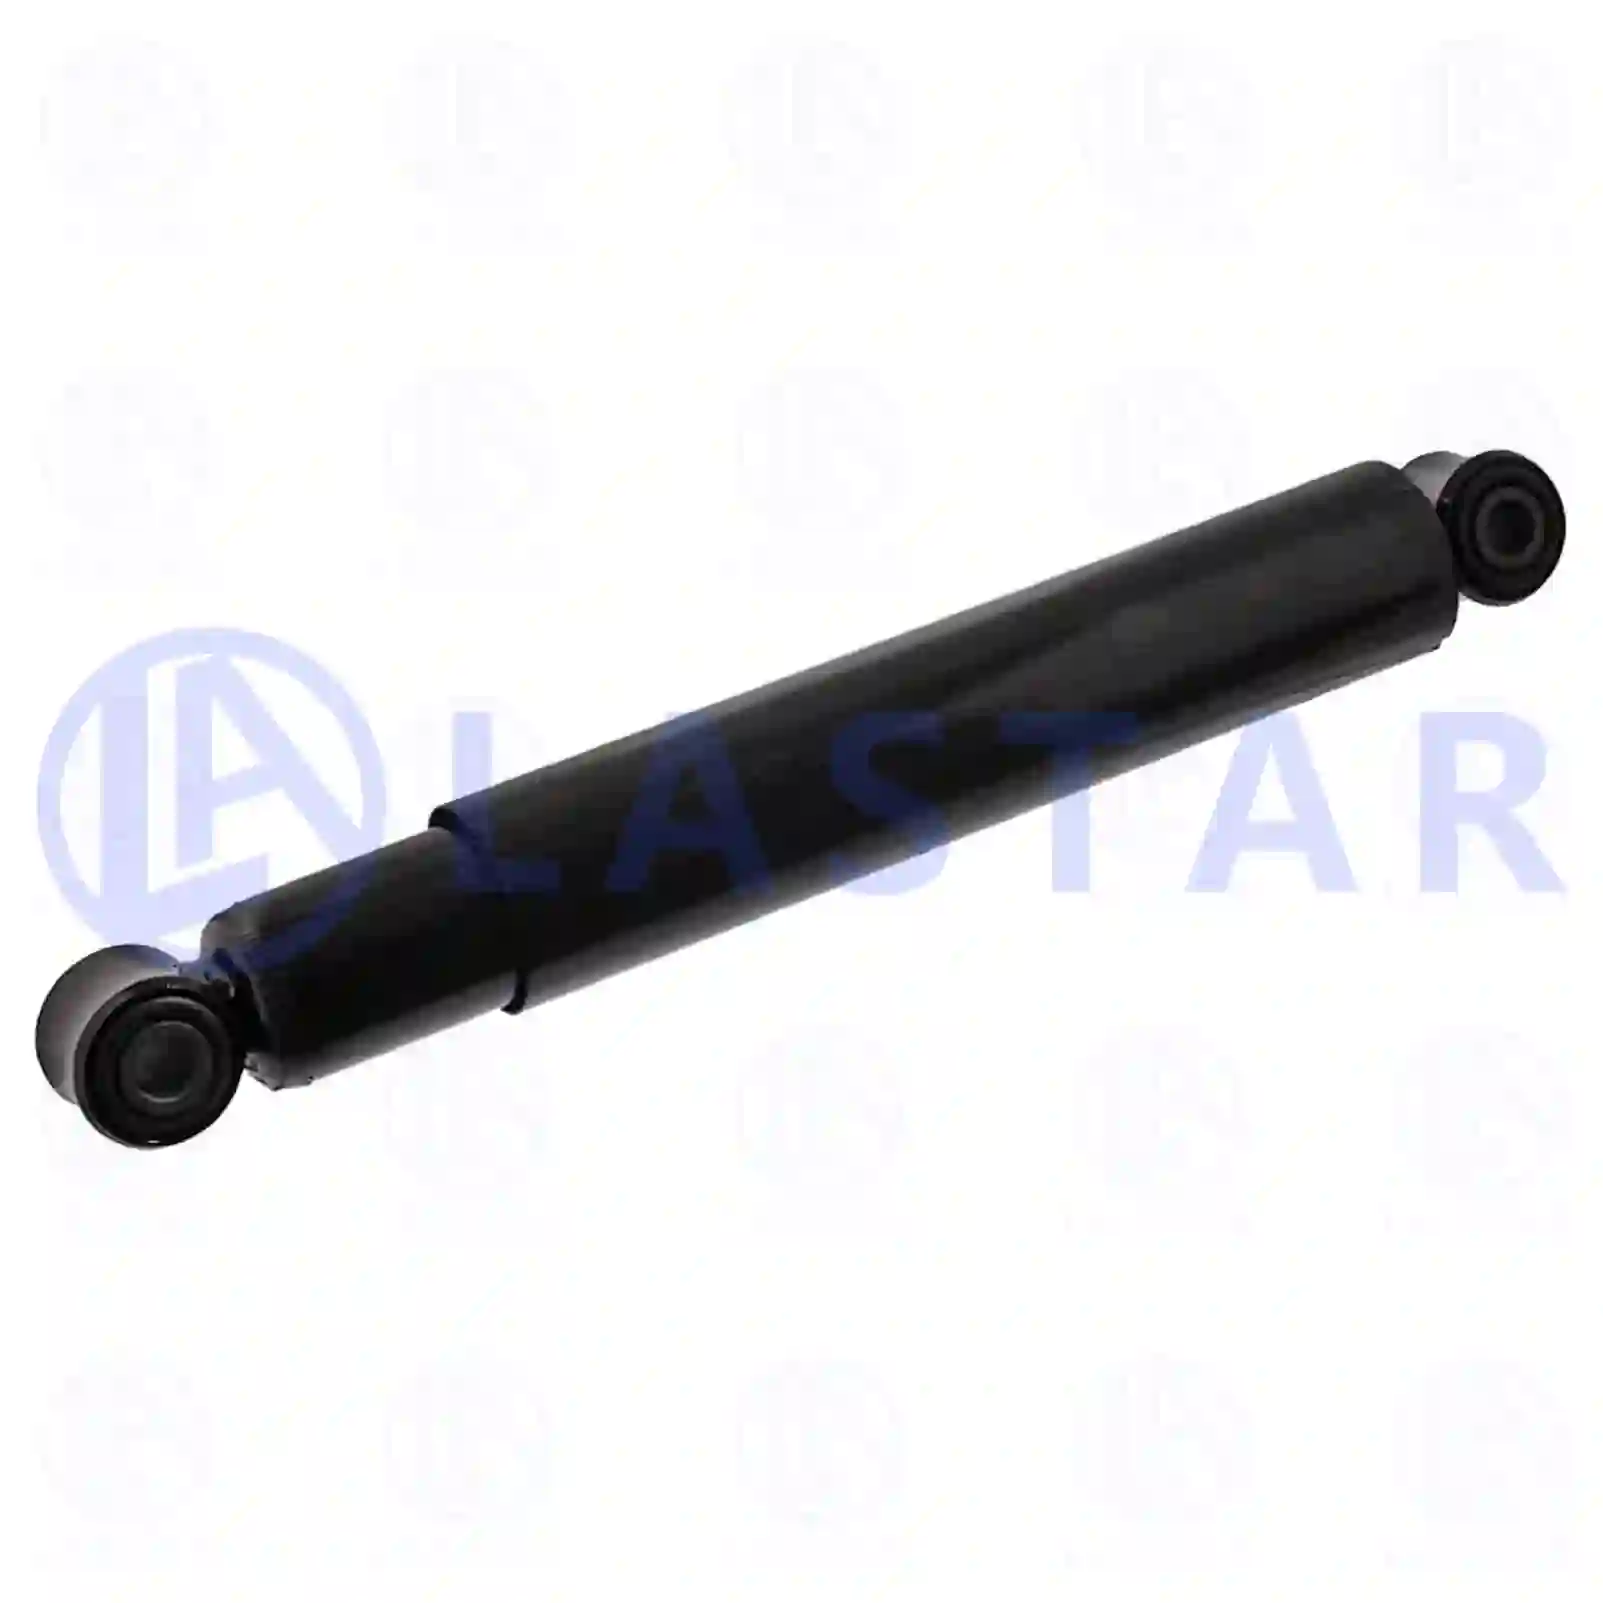 Shock absorber, 77727826, 0053261400, 0063260500, ZG41587-0008, , ||  77727826 Lastar Spare Part | Truck Spare Parts, Auotomotive Spare Parts Shock absorber, 77727826, 0053261400, 0063260500, ZG41587-0008, , ||  77727826 Lastar Spare Part | Truck Spare Parts, Auotomotive Spare Parts